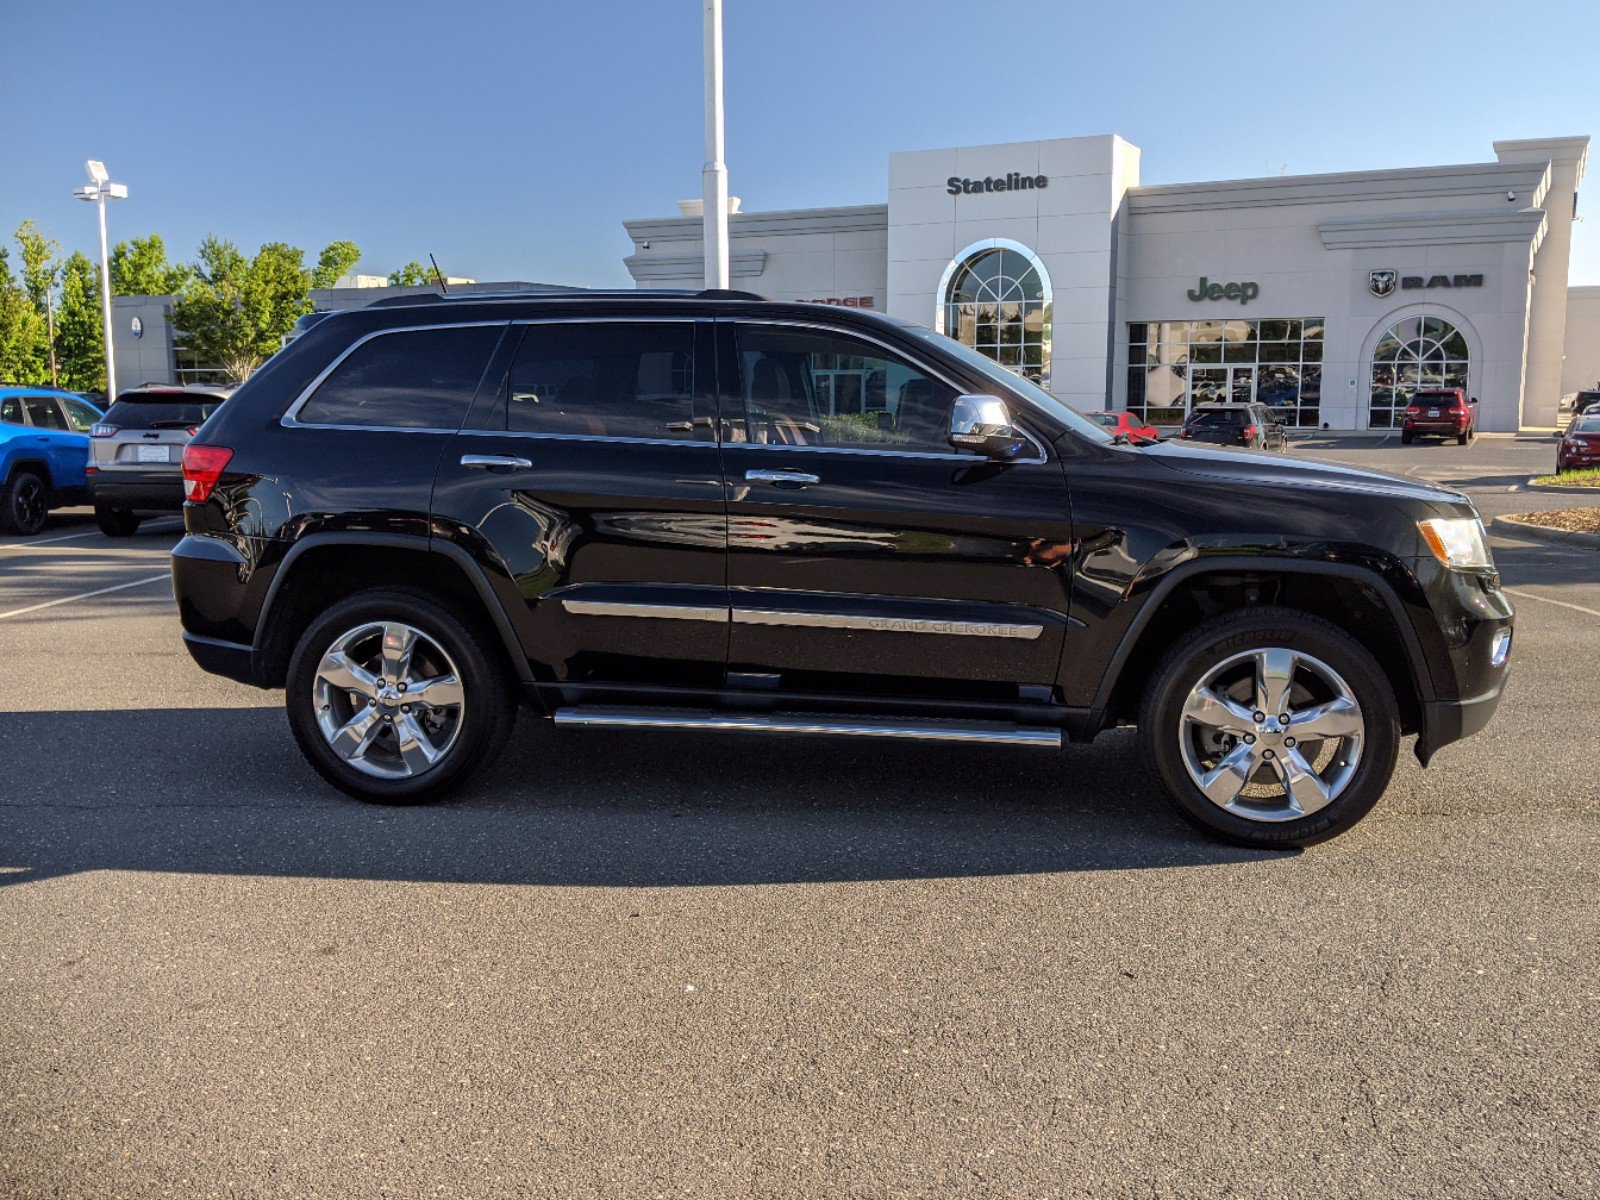 PreOwned 2013 Jeep Grand Cherokee Overland Summit With